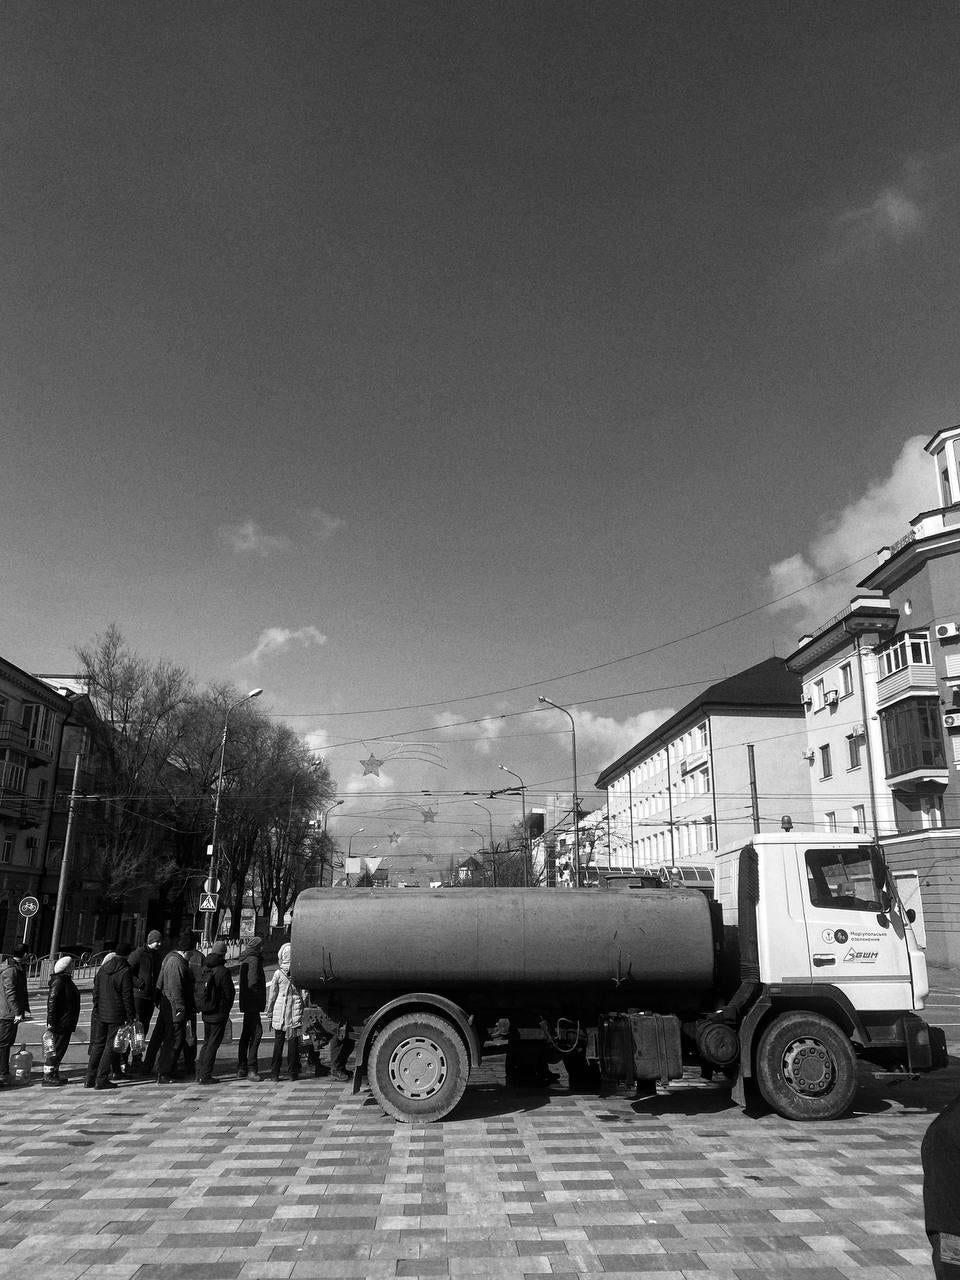 People without access to running water in Mariupol wait on line for water from a water truck